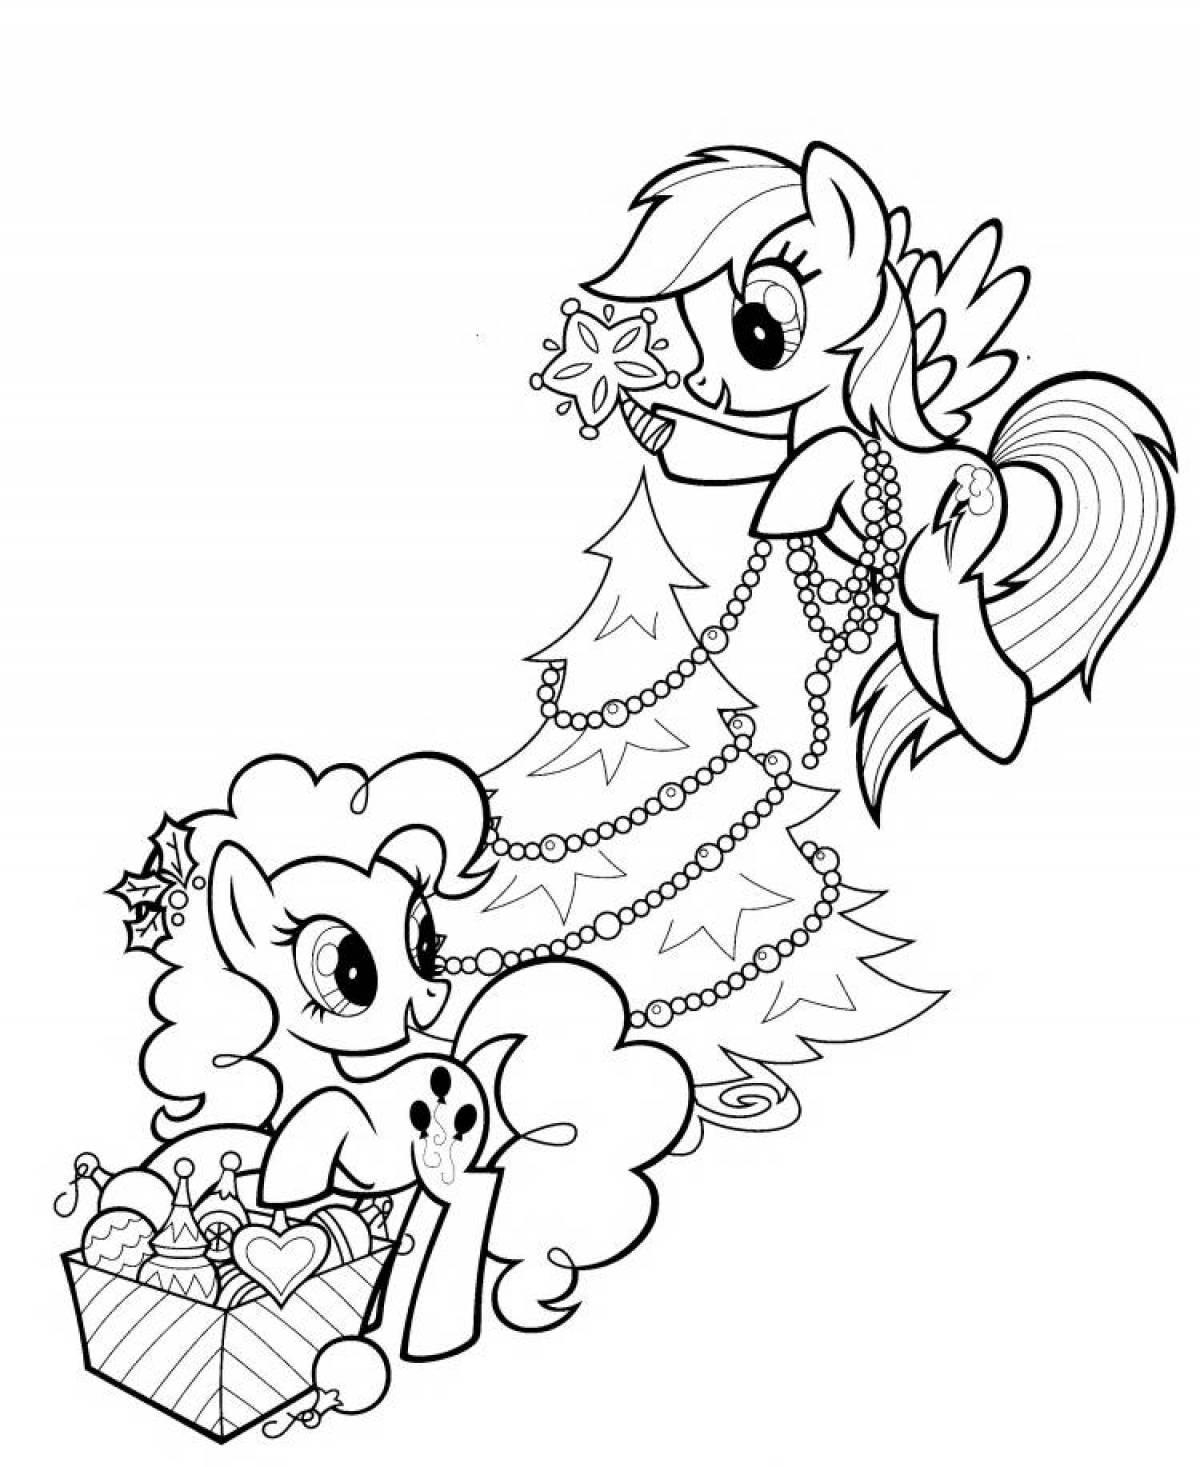 Fancy Christmas pony coloring page